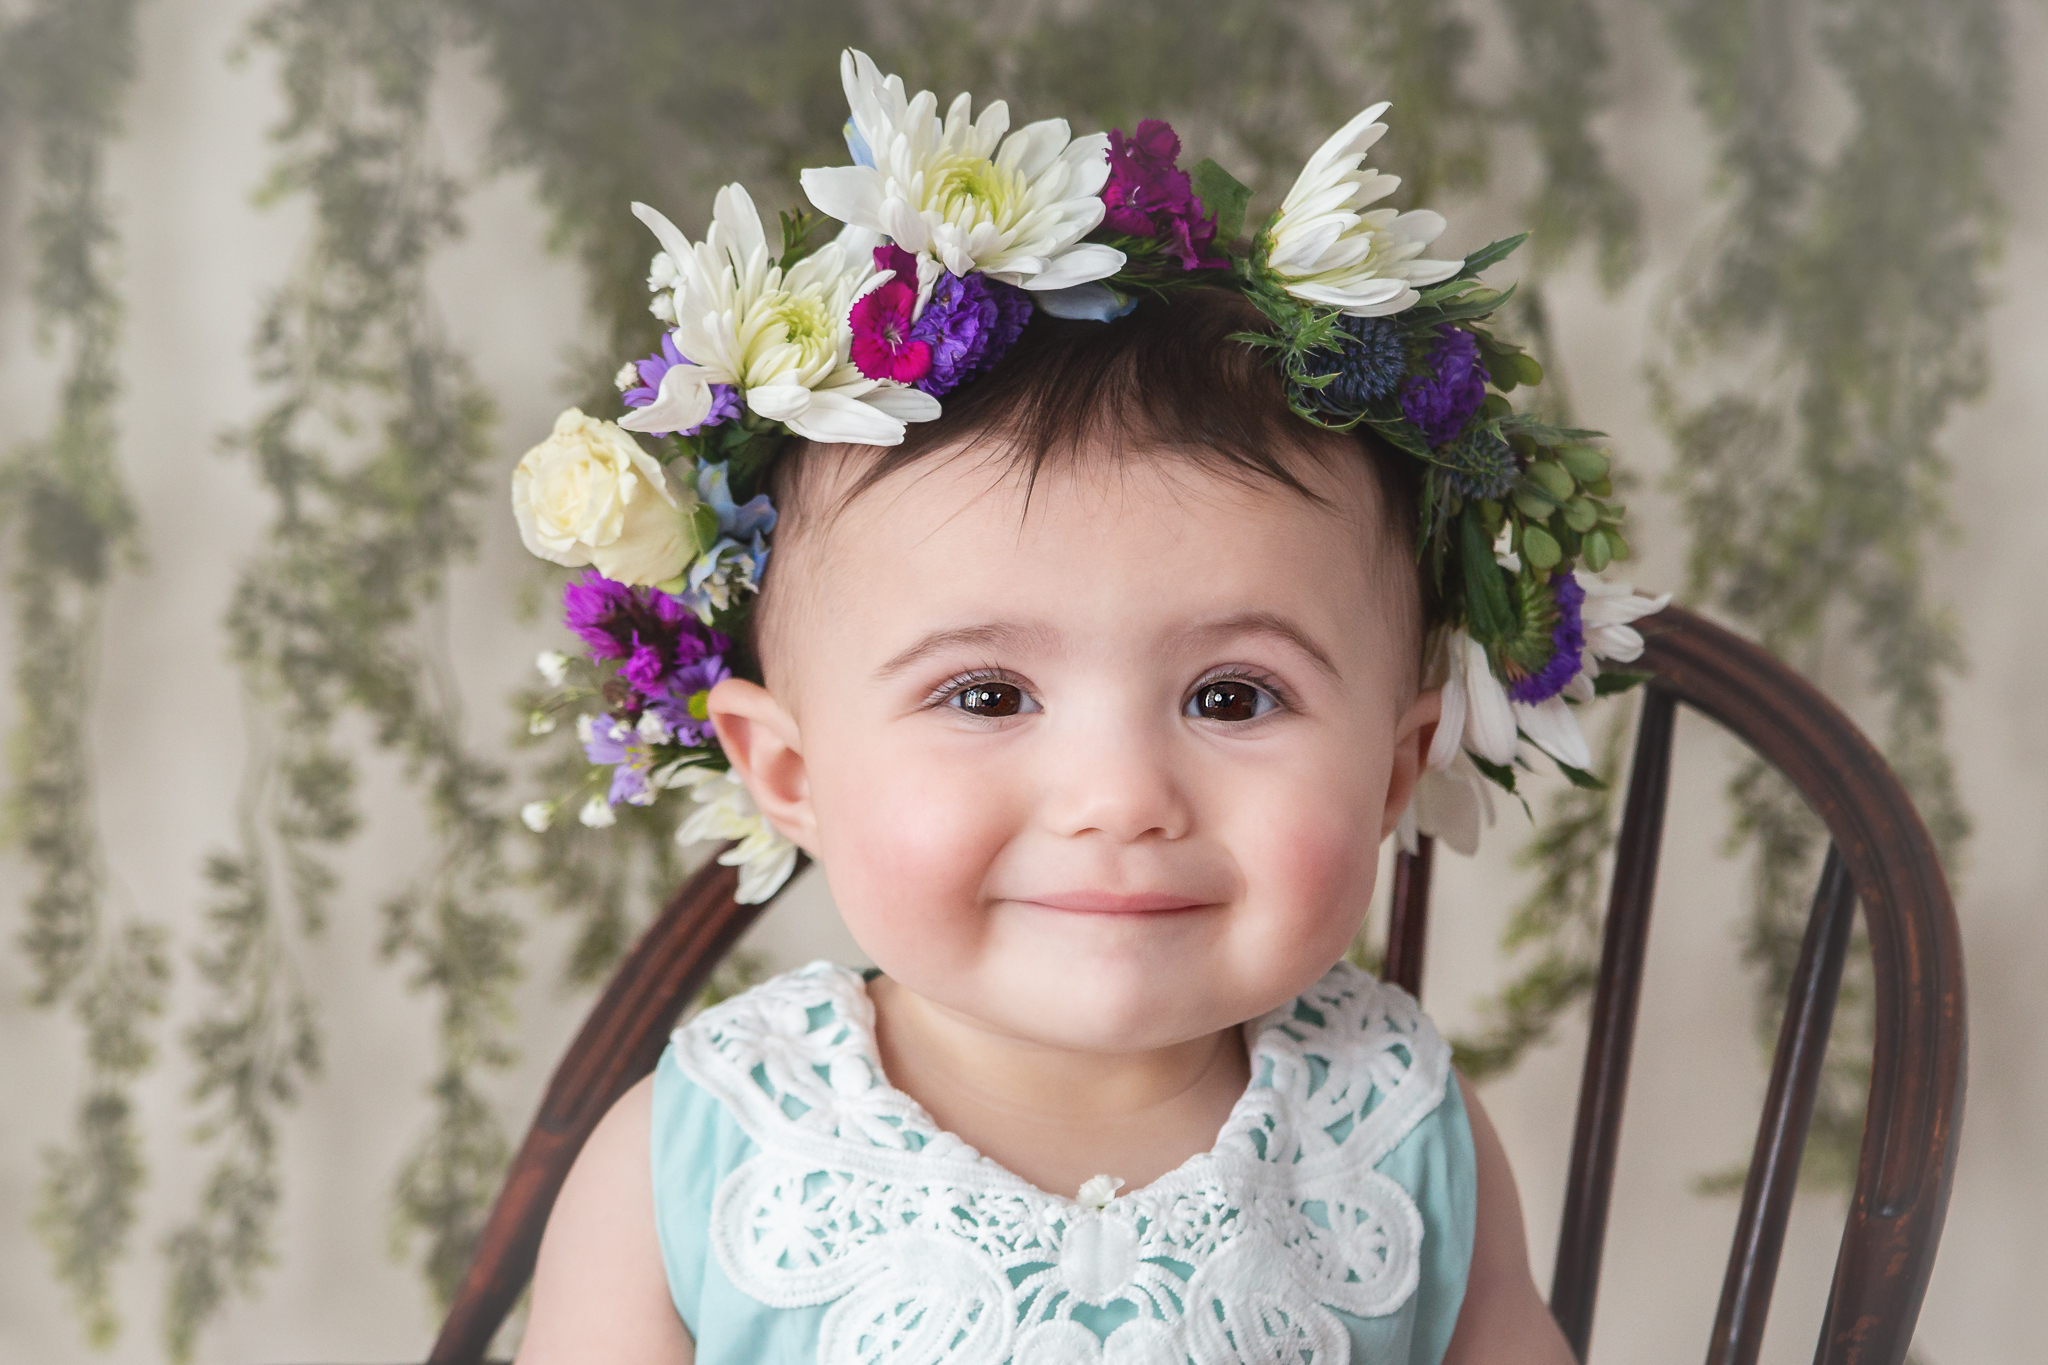 Photography session-Studio Sitter-Watch Me Grow-Baby-Child-Model-Photography-milestone-8 month-vines-flowers-ingleside-crystal lake-illinois-portrait